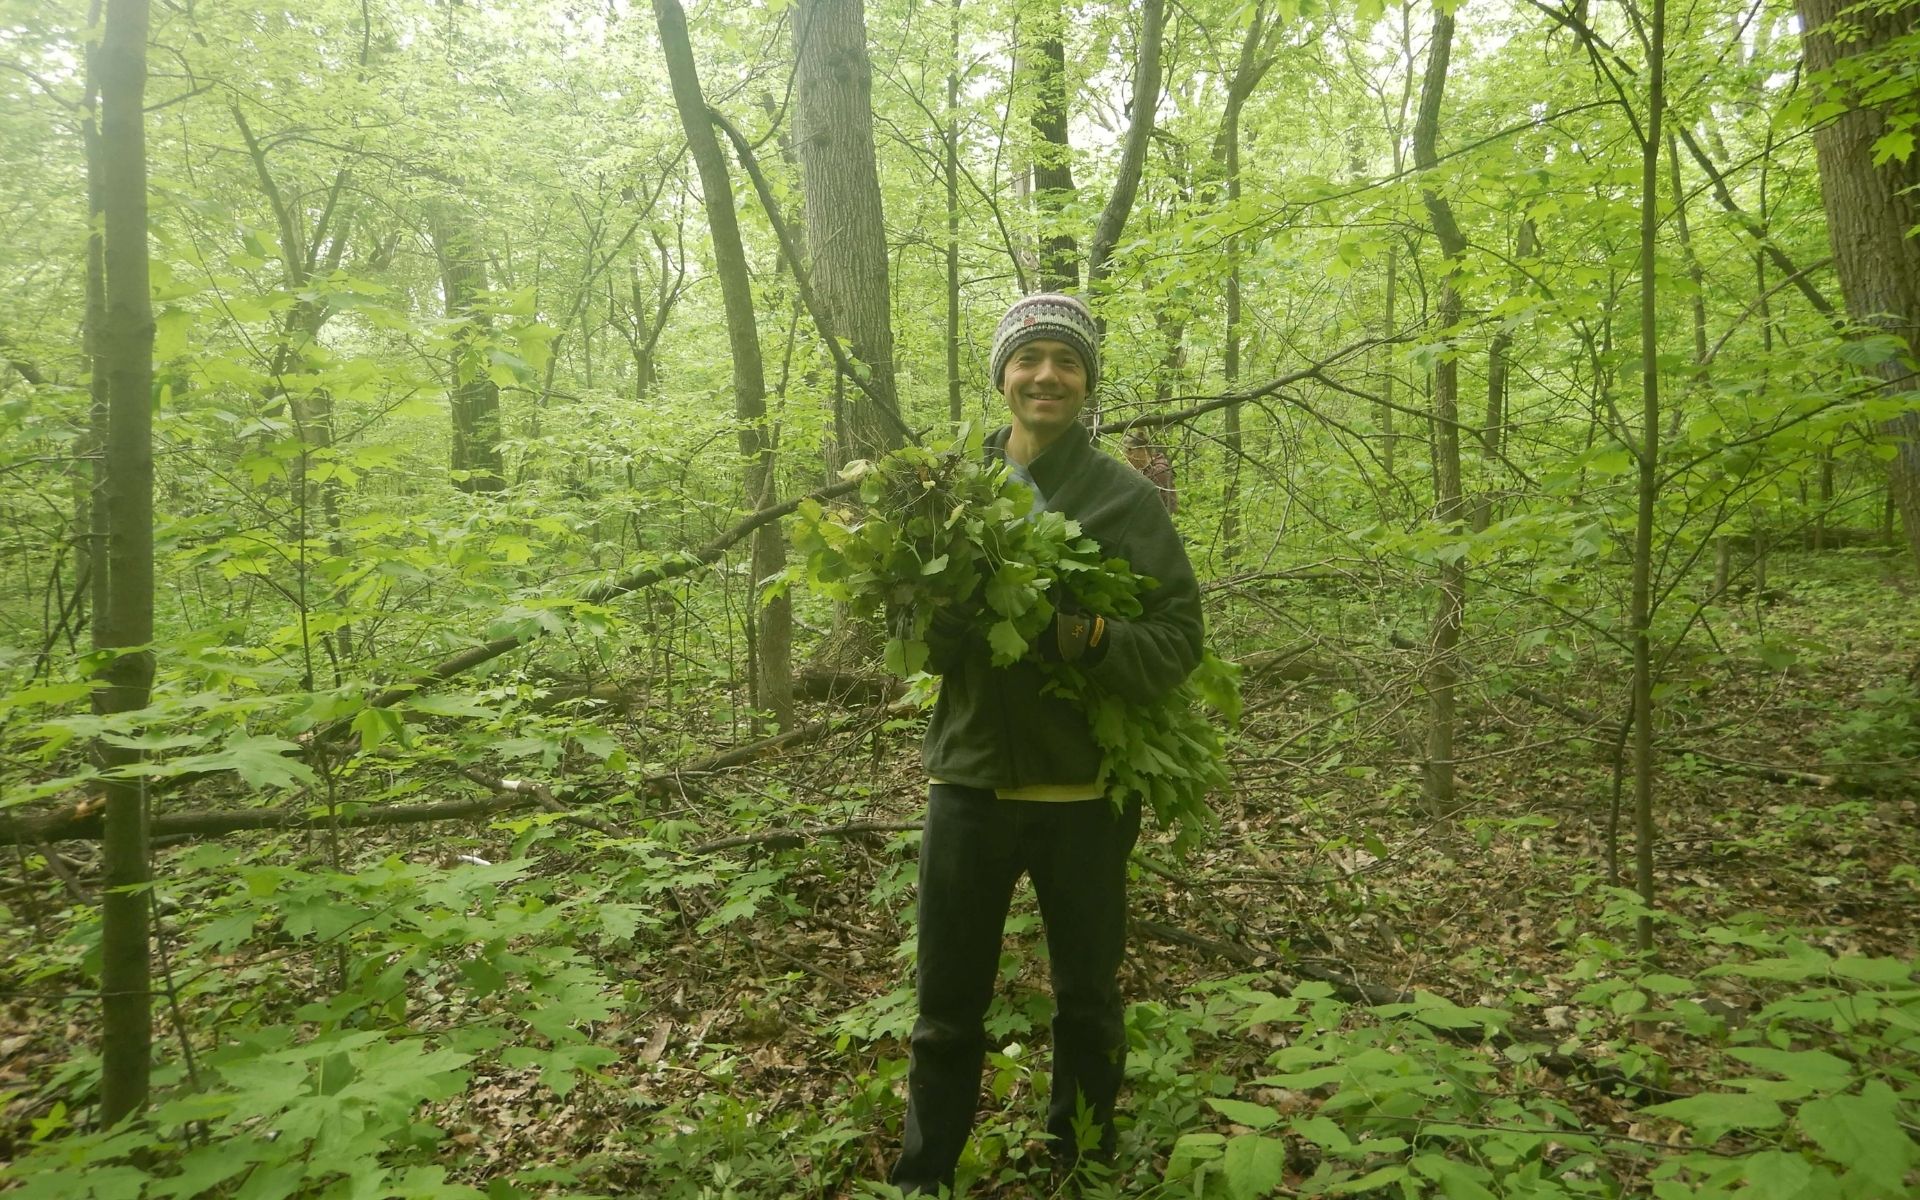 Volunteer Allan with an armful of garlic mustard at the sand flats